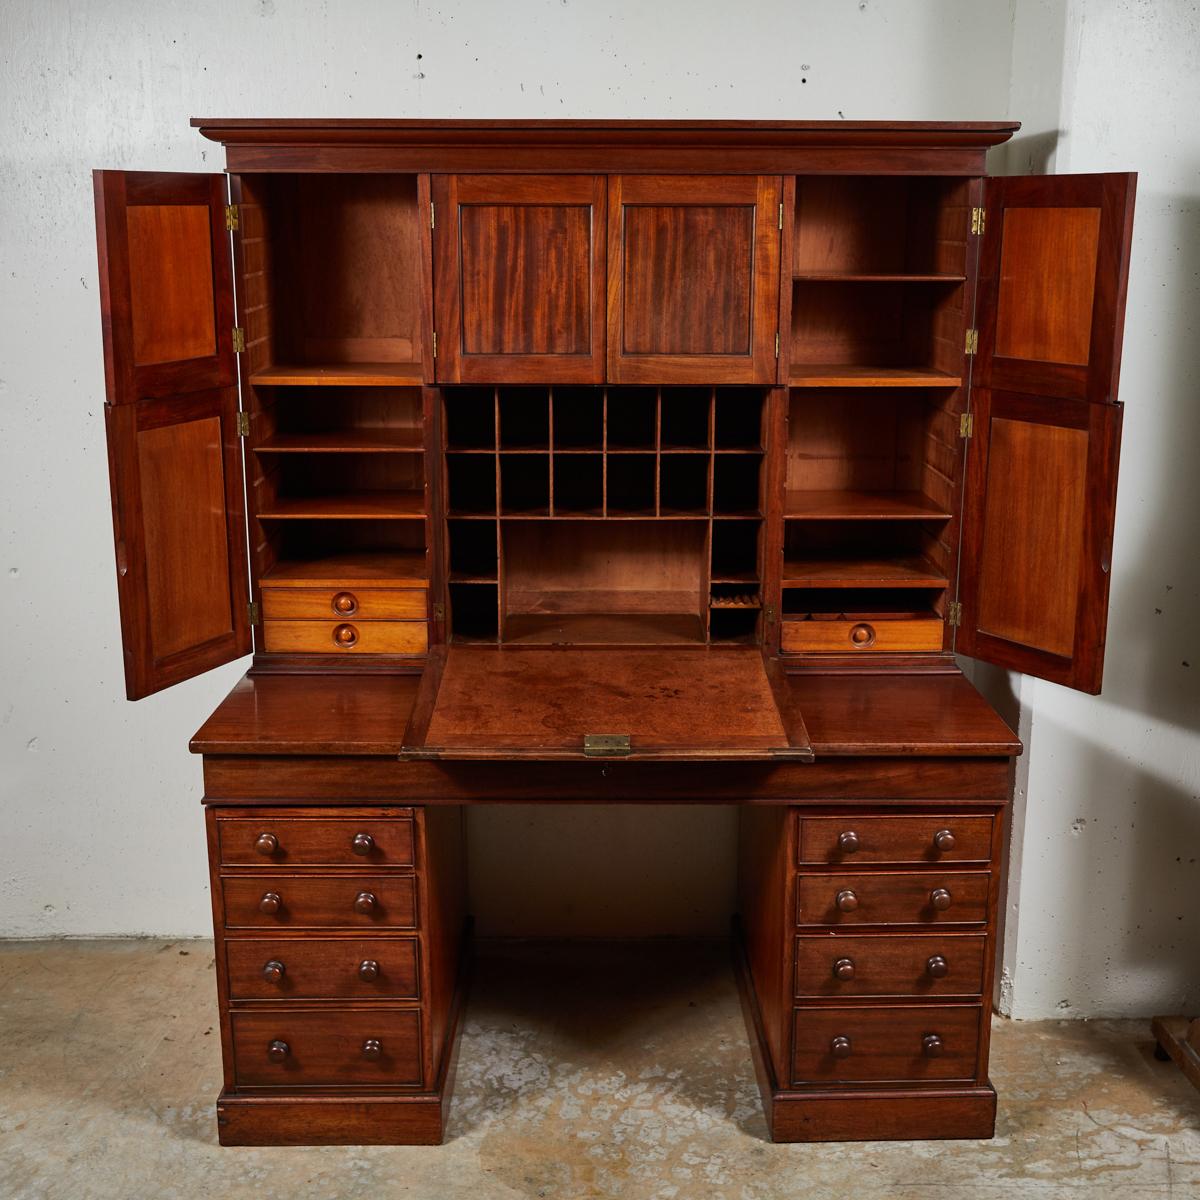 English 1850s mahogany estate desk. An exceptionally handsome piece, the upper cupboard is crowned with a simple molded cornice, and encloses a geometric array of pigeon holes, drawers and shelves. It sits mounted on a fall-front writing surface and